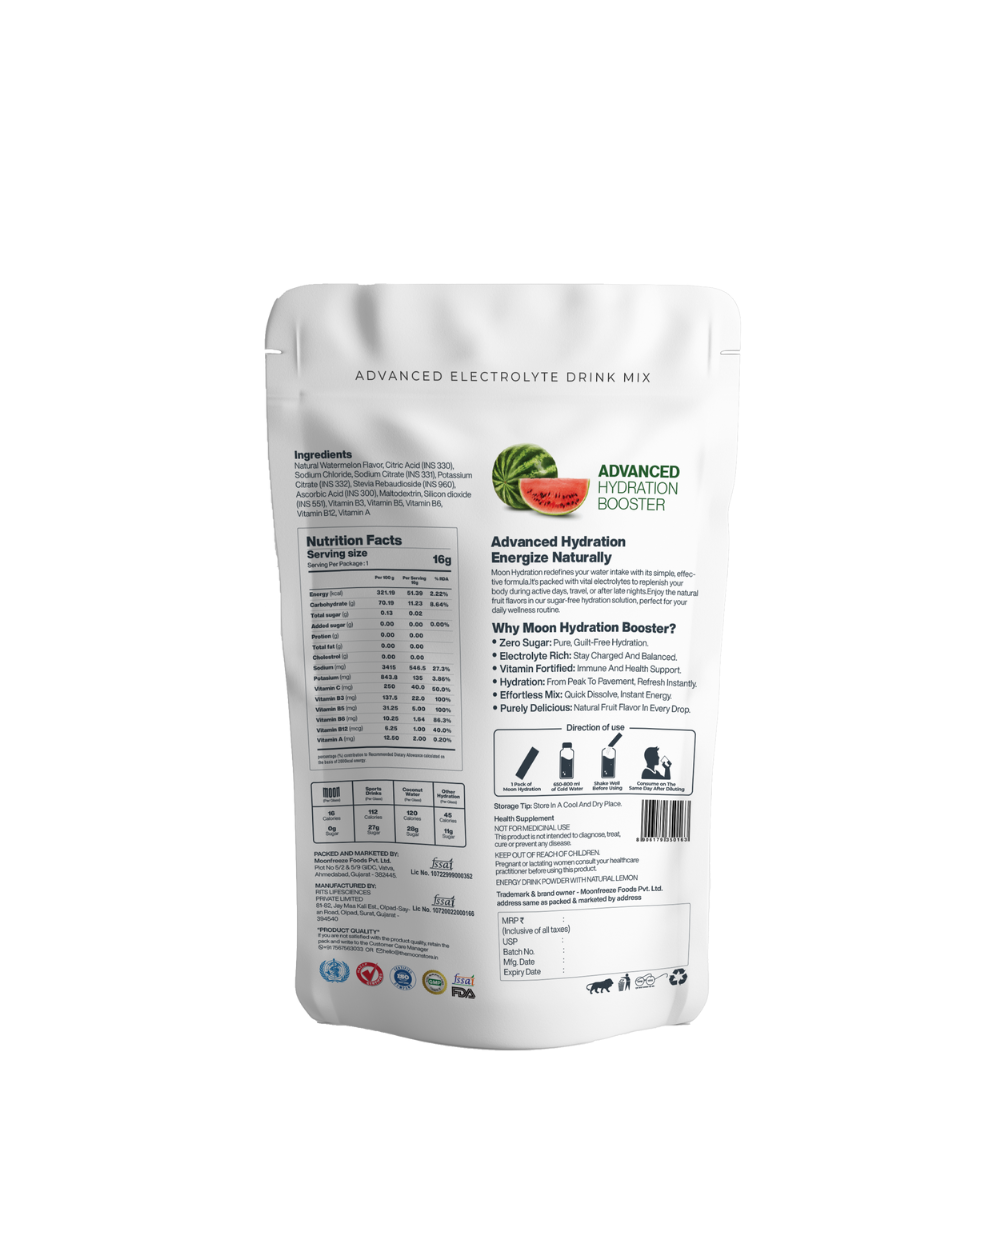 A product image featuring the backside of a bag of Moon Watermelon Lunar Hydration Booster - Pack of 3 drink mix with nutritional facts and promotional information by MOONFREEZE FOODS PRIVATE LIMITED.